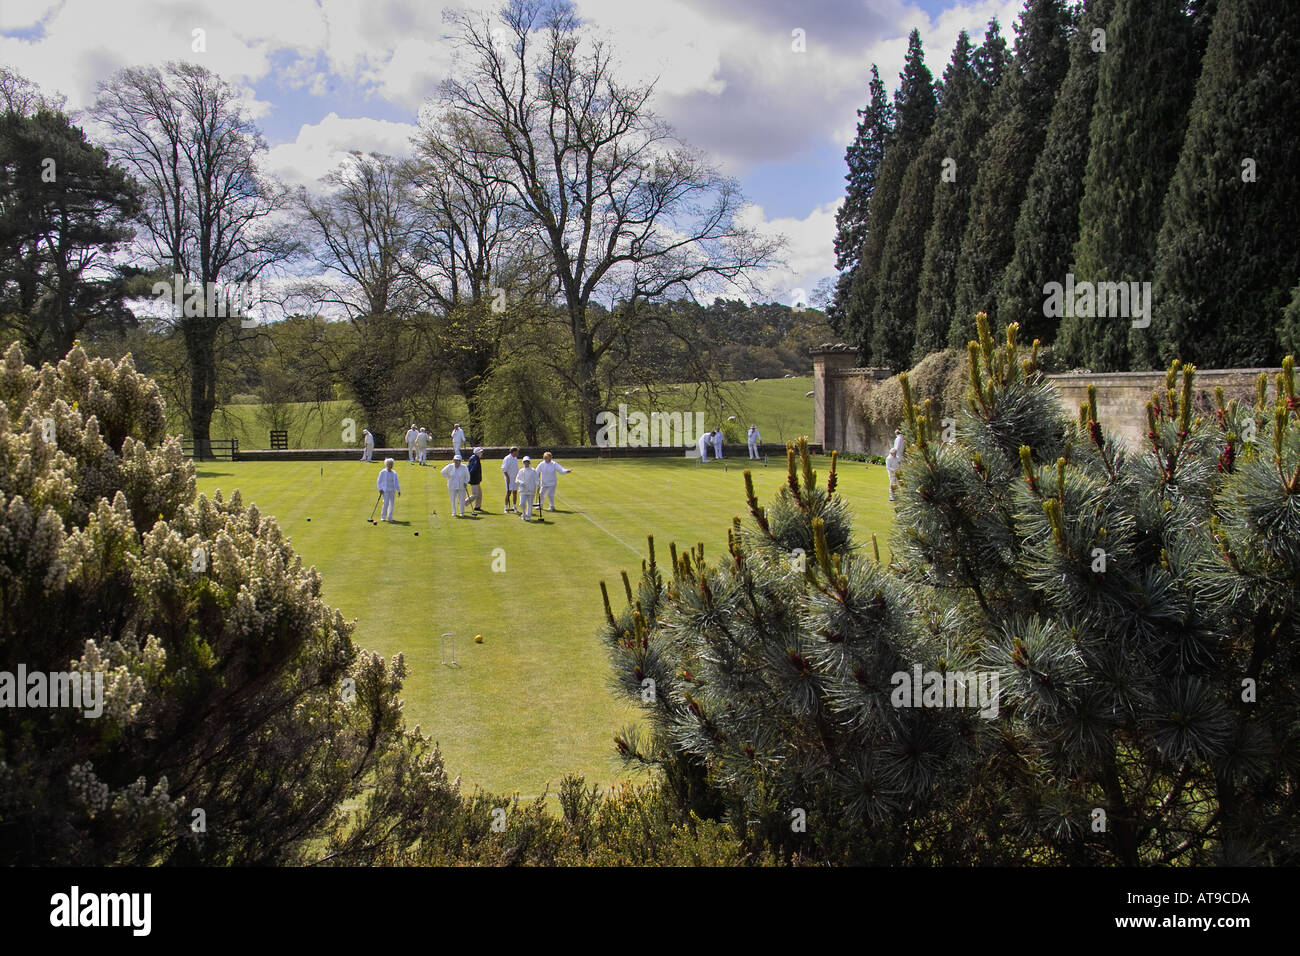 Croquet in Spring at the Belsay Croquet Club elegantly housed in the grounds of the Regency Belsay House Northumberland UK Stock Photo